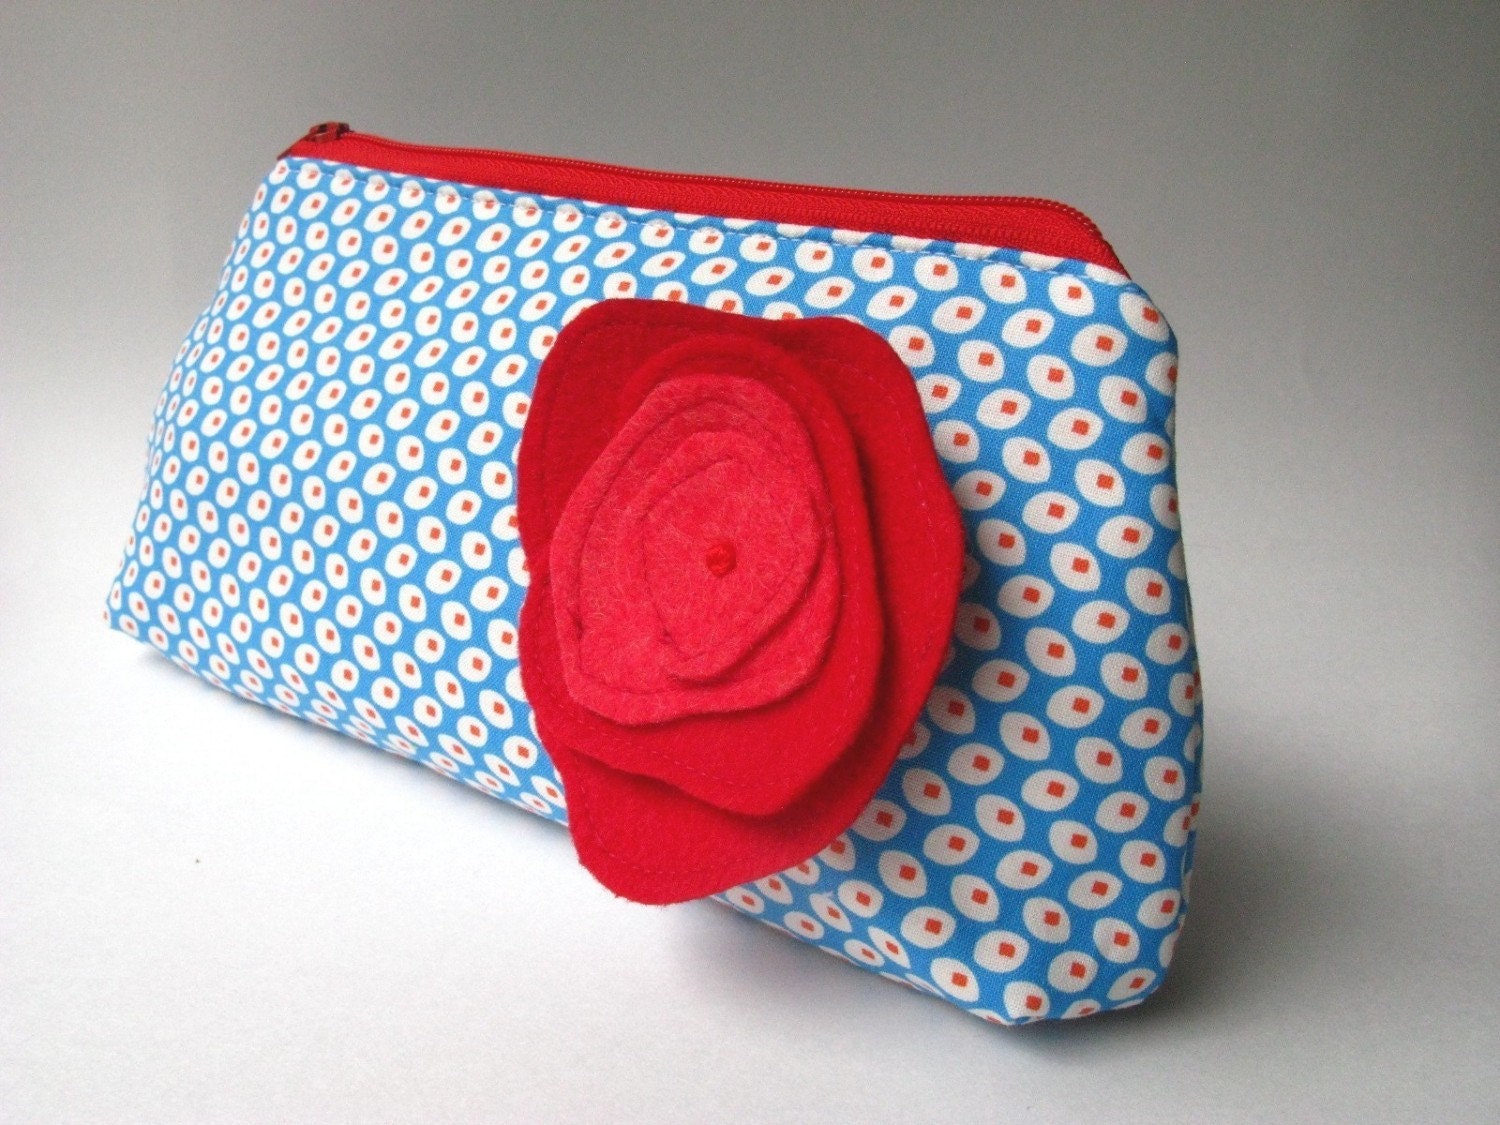 Zipper Clutch - Frenchy in Red and Blue Dots with Poppy Brooch